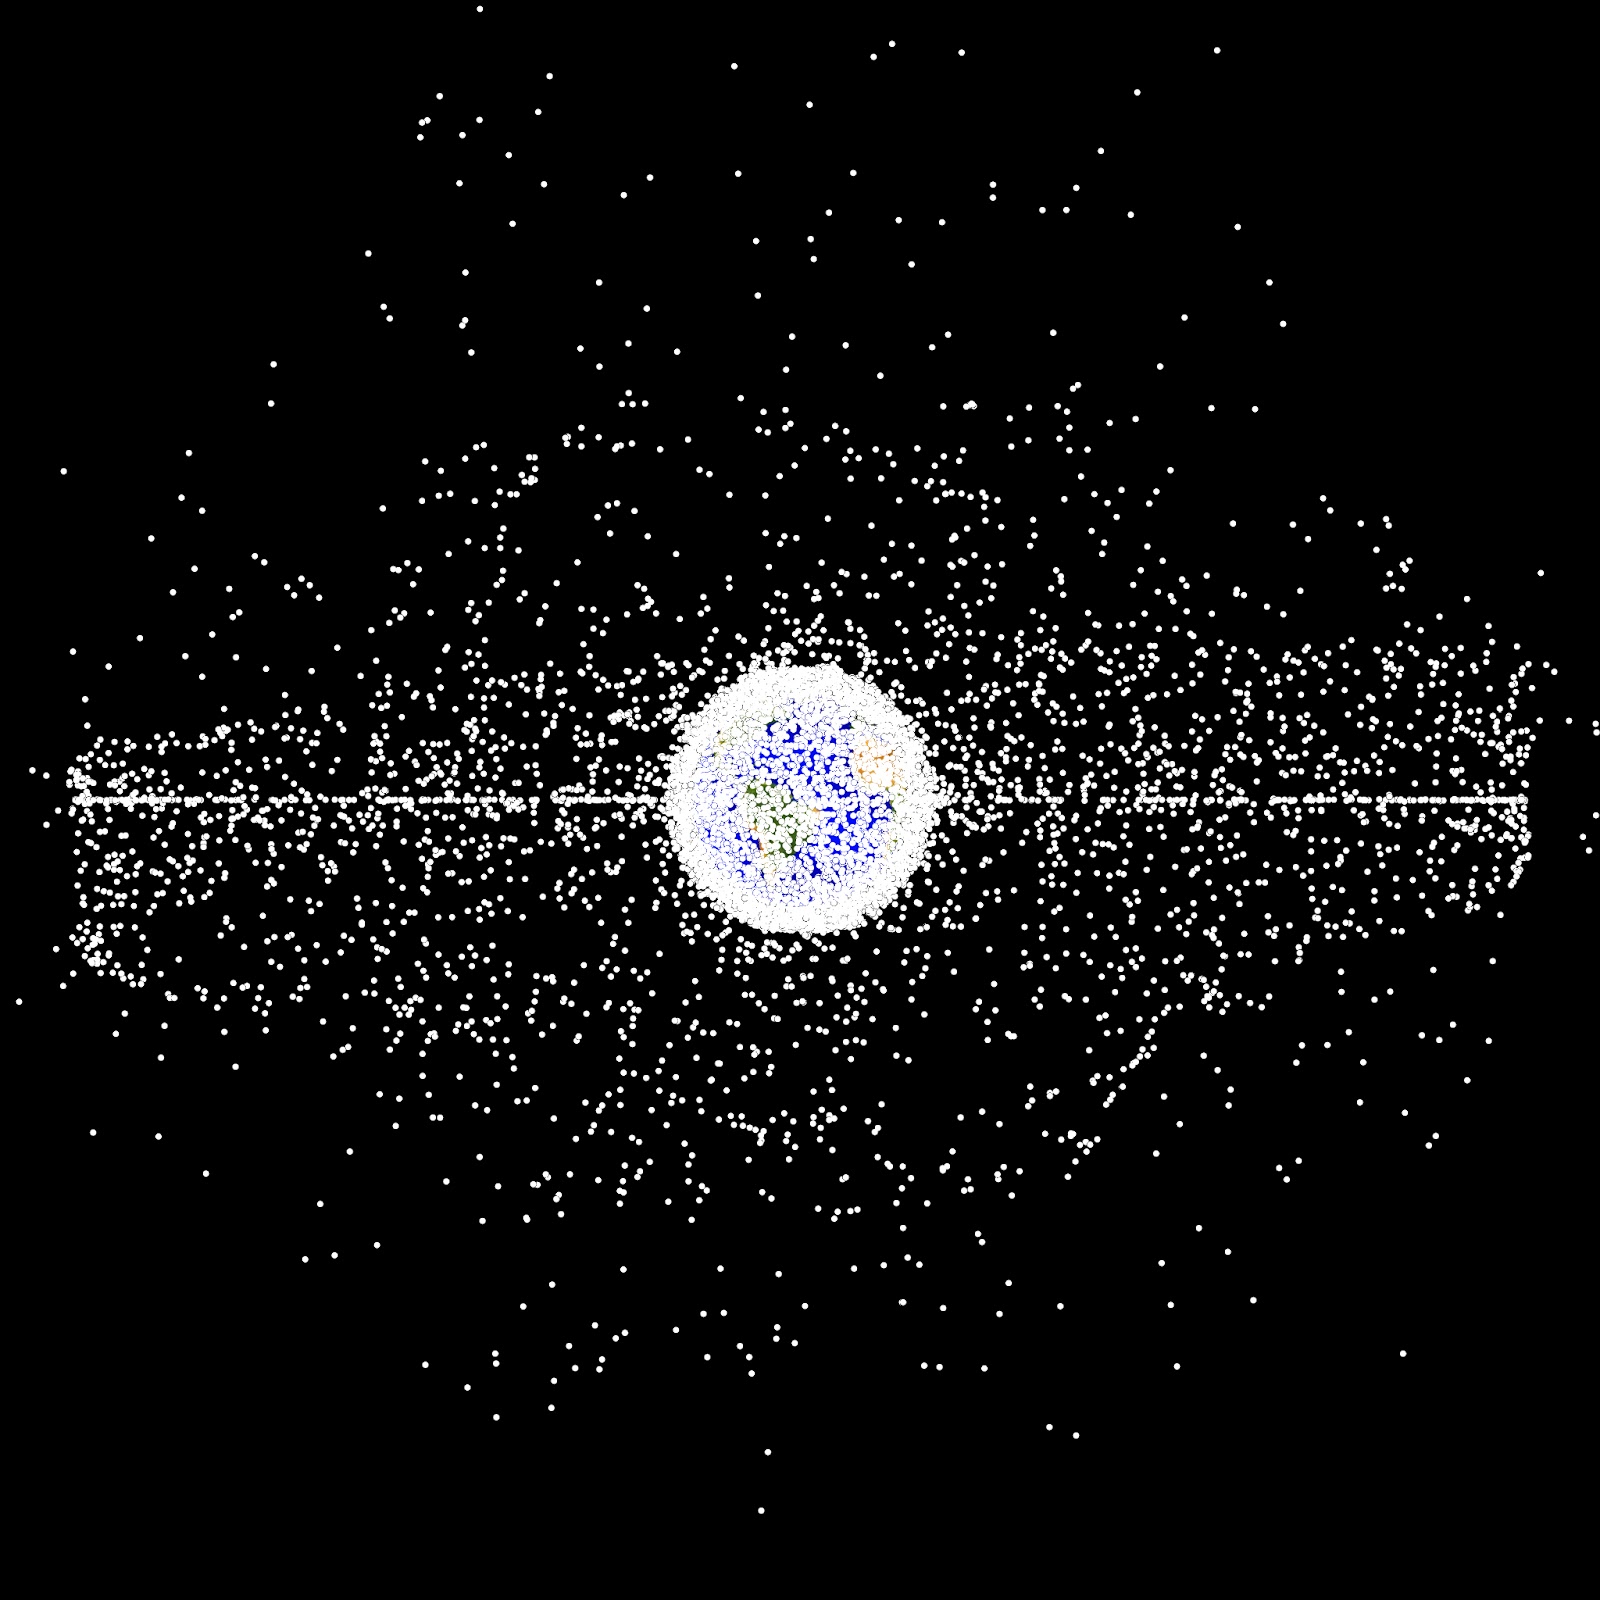 A diagram of the Earth with dots signifying bits of space debris around it